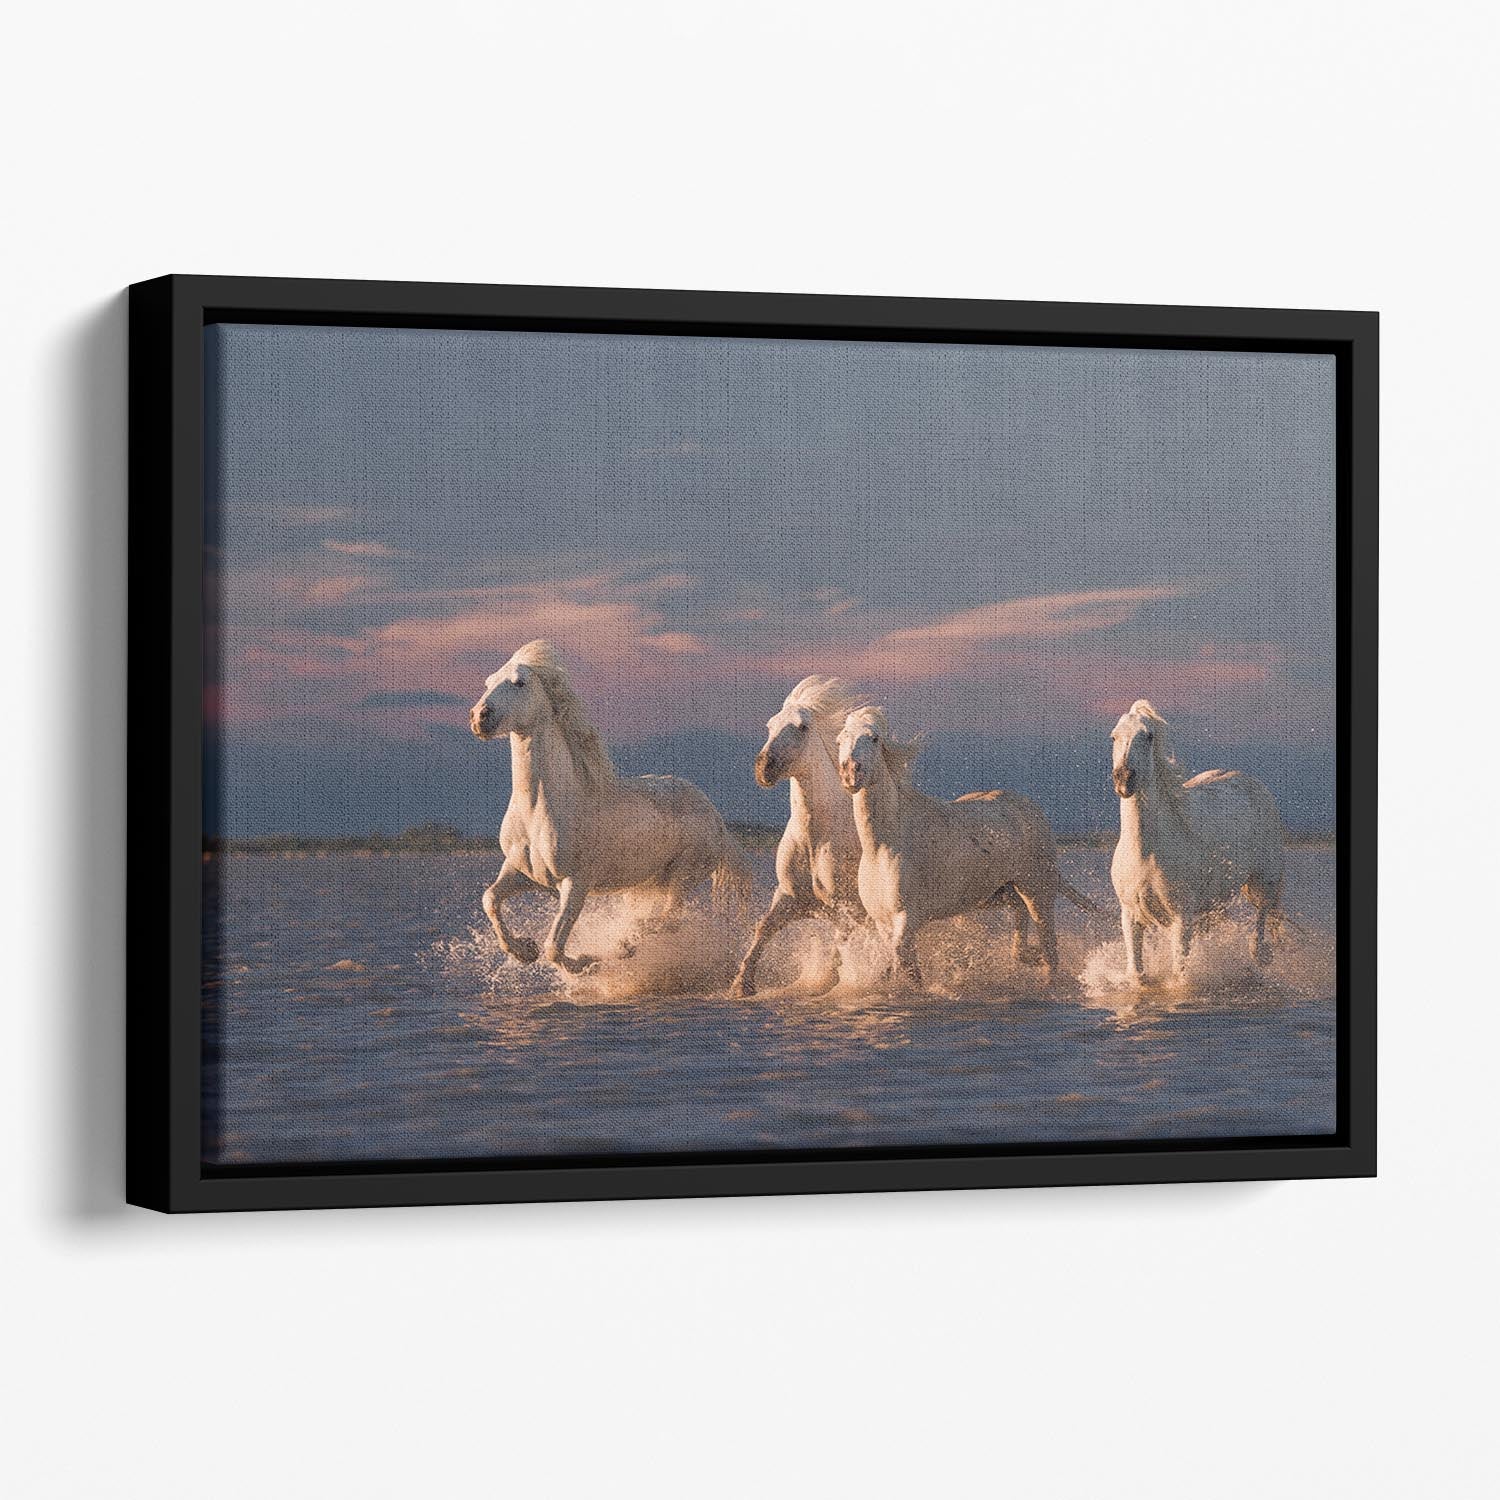 Wite Horses Running In Water 2 Floating Framed Canvas - Canvas Art Rocks - 1